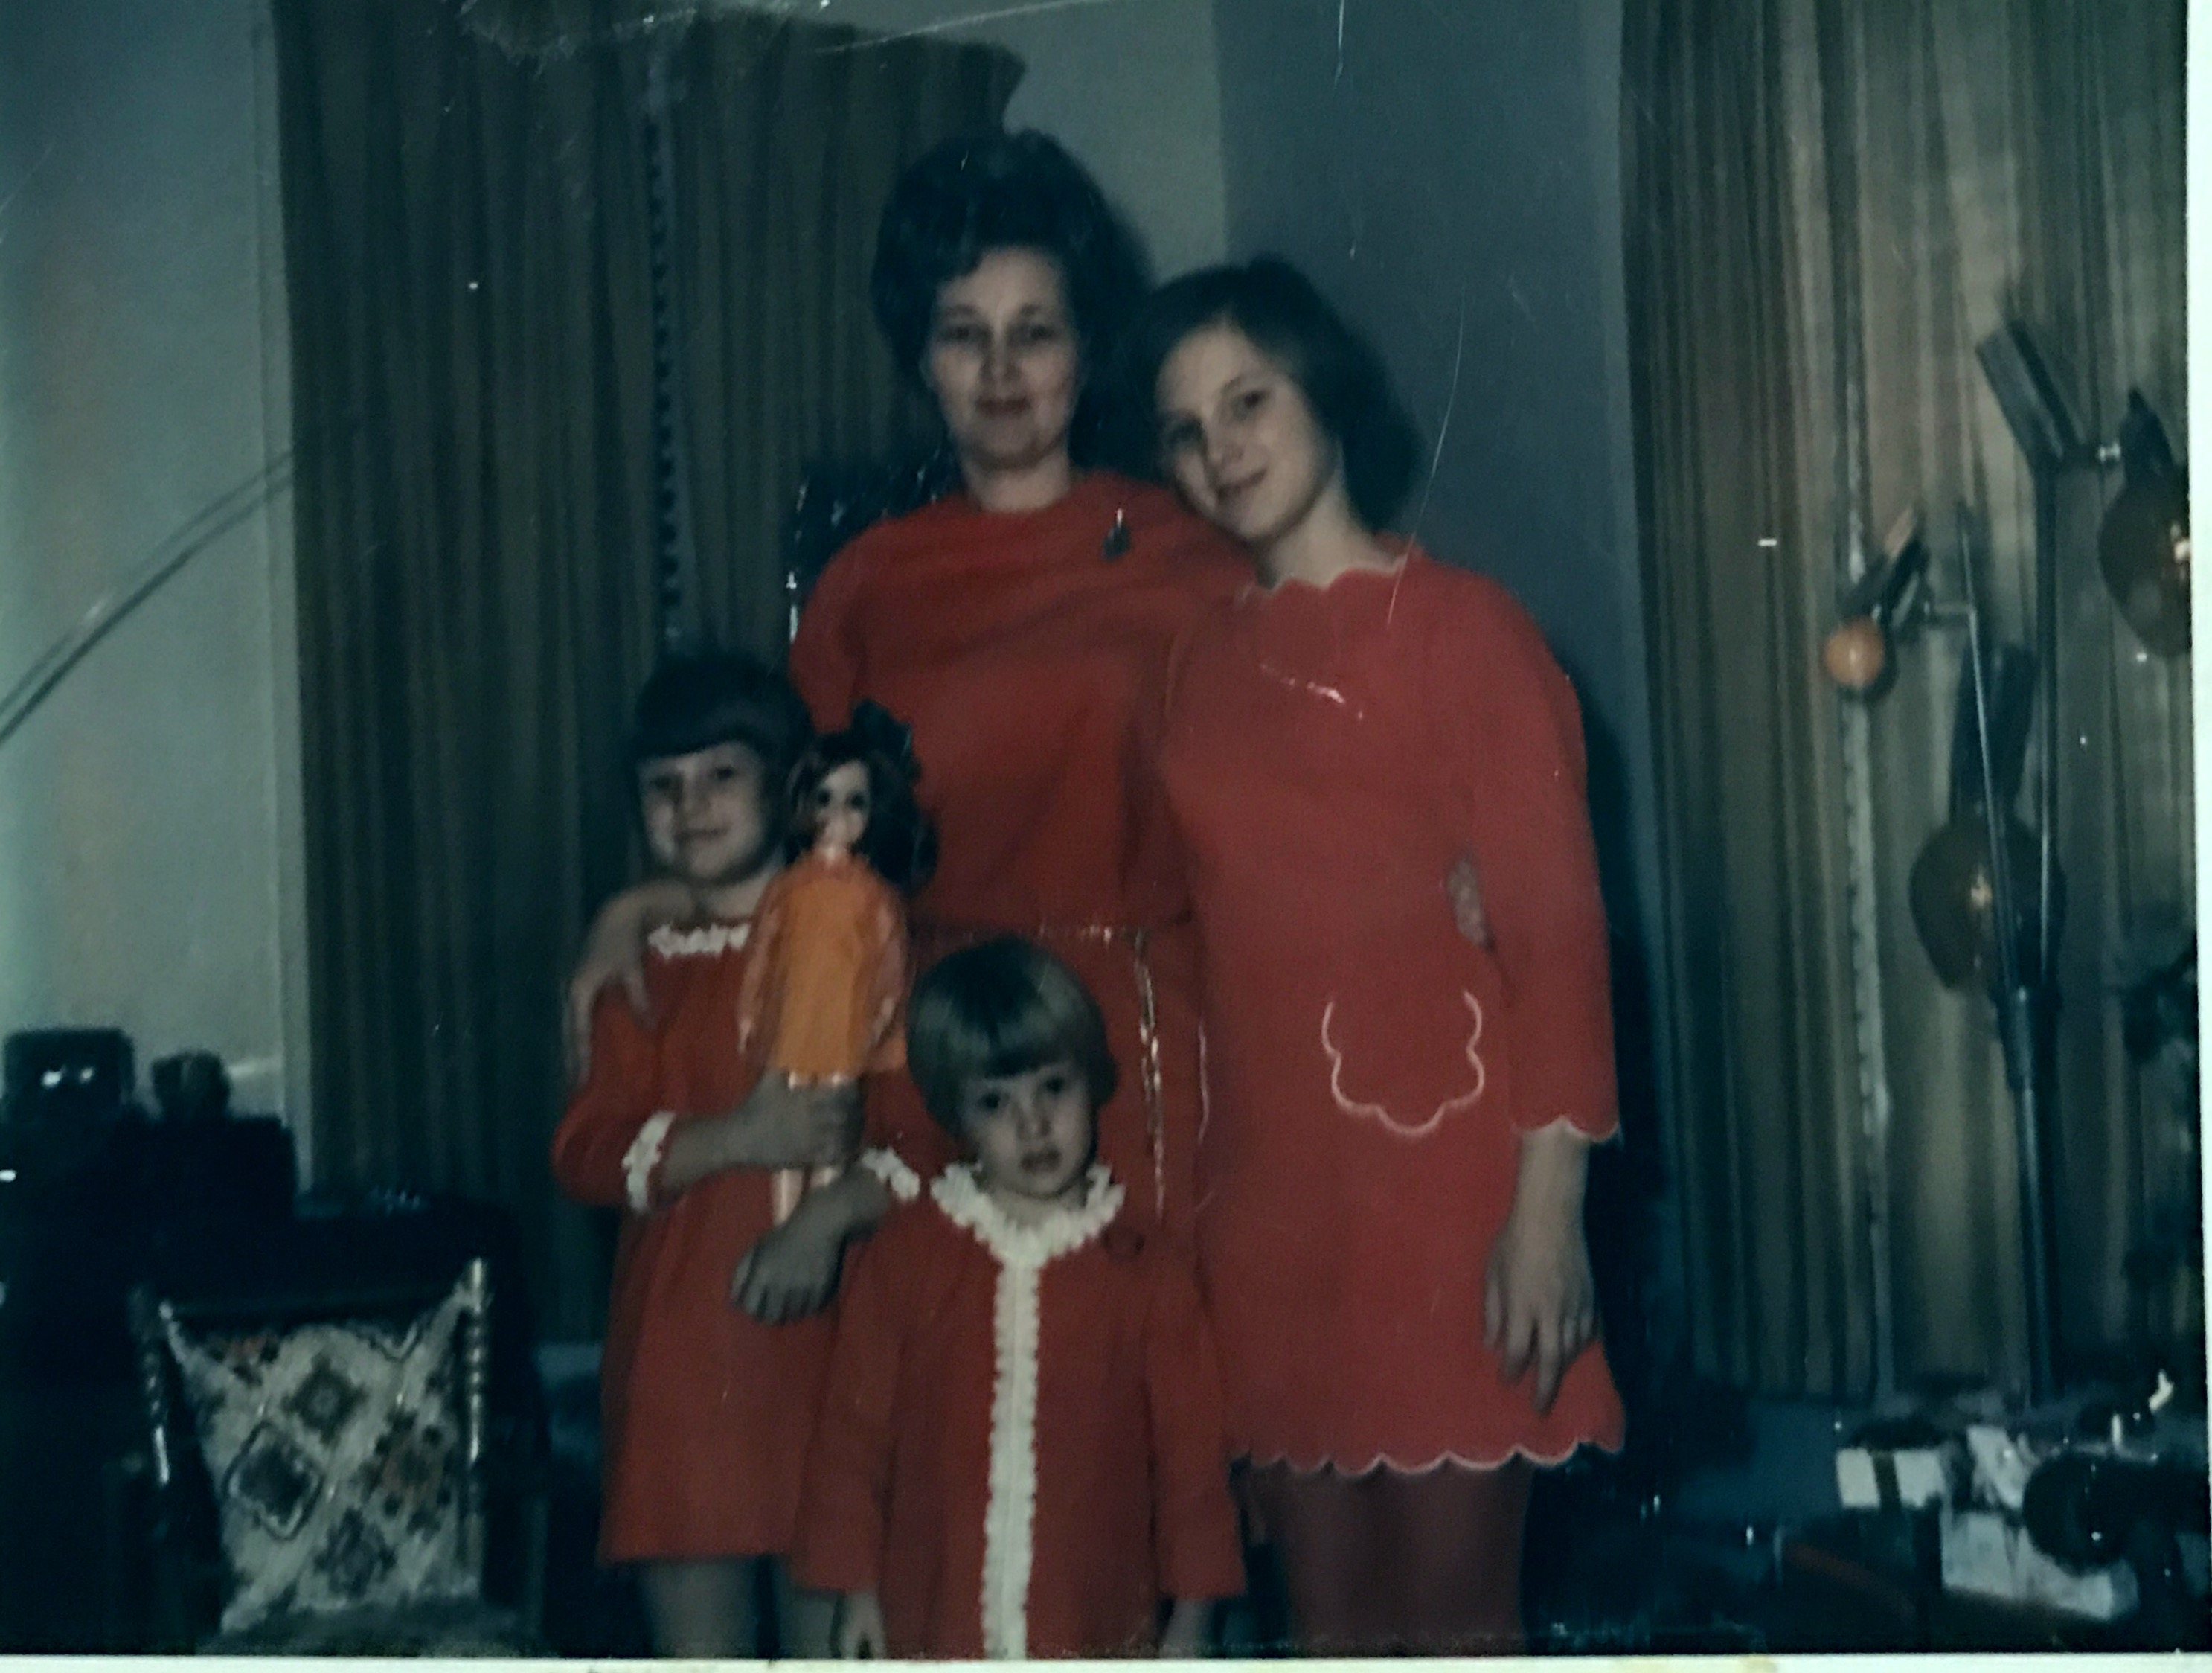 Christmas 1970 ish in matching outfits I'm sure made by our Mother and grandmother